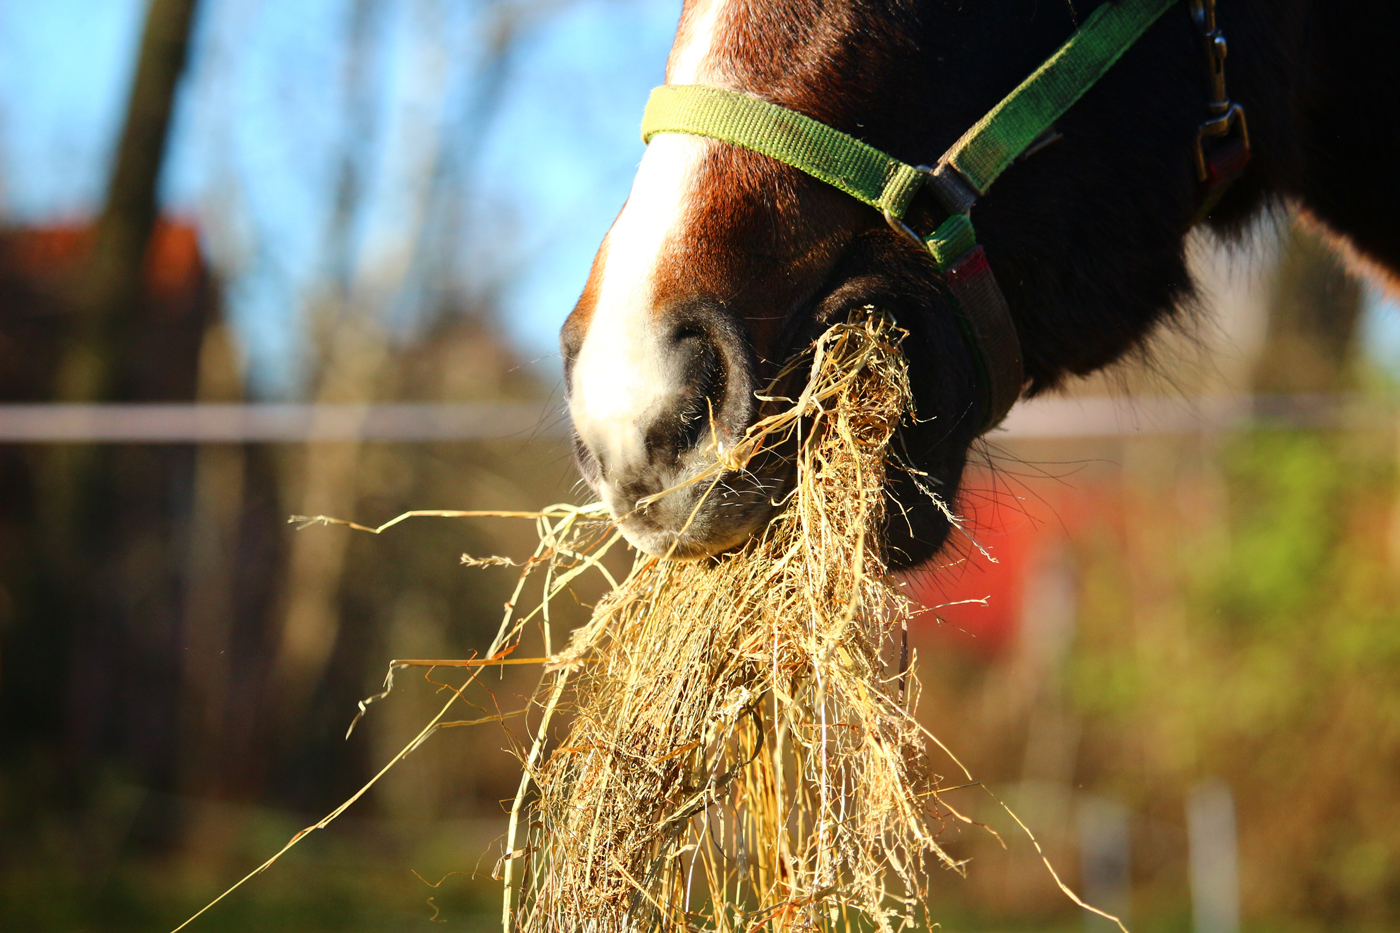 A horse eating hay